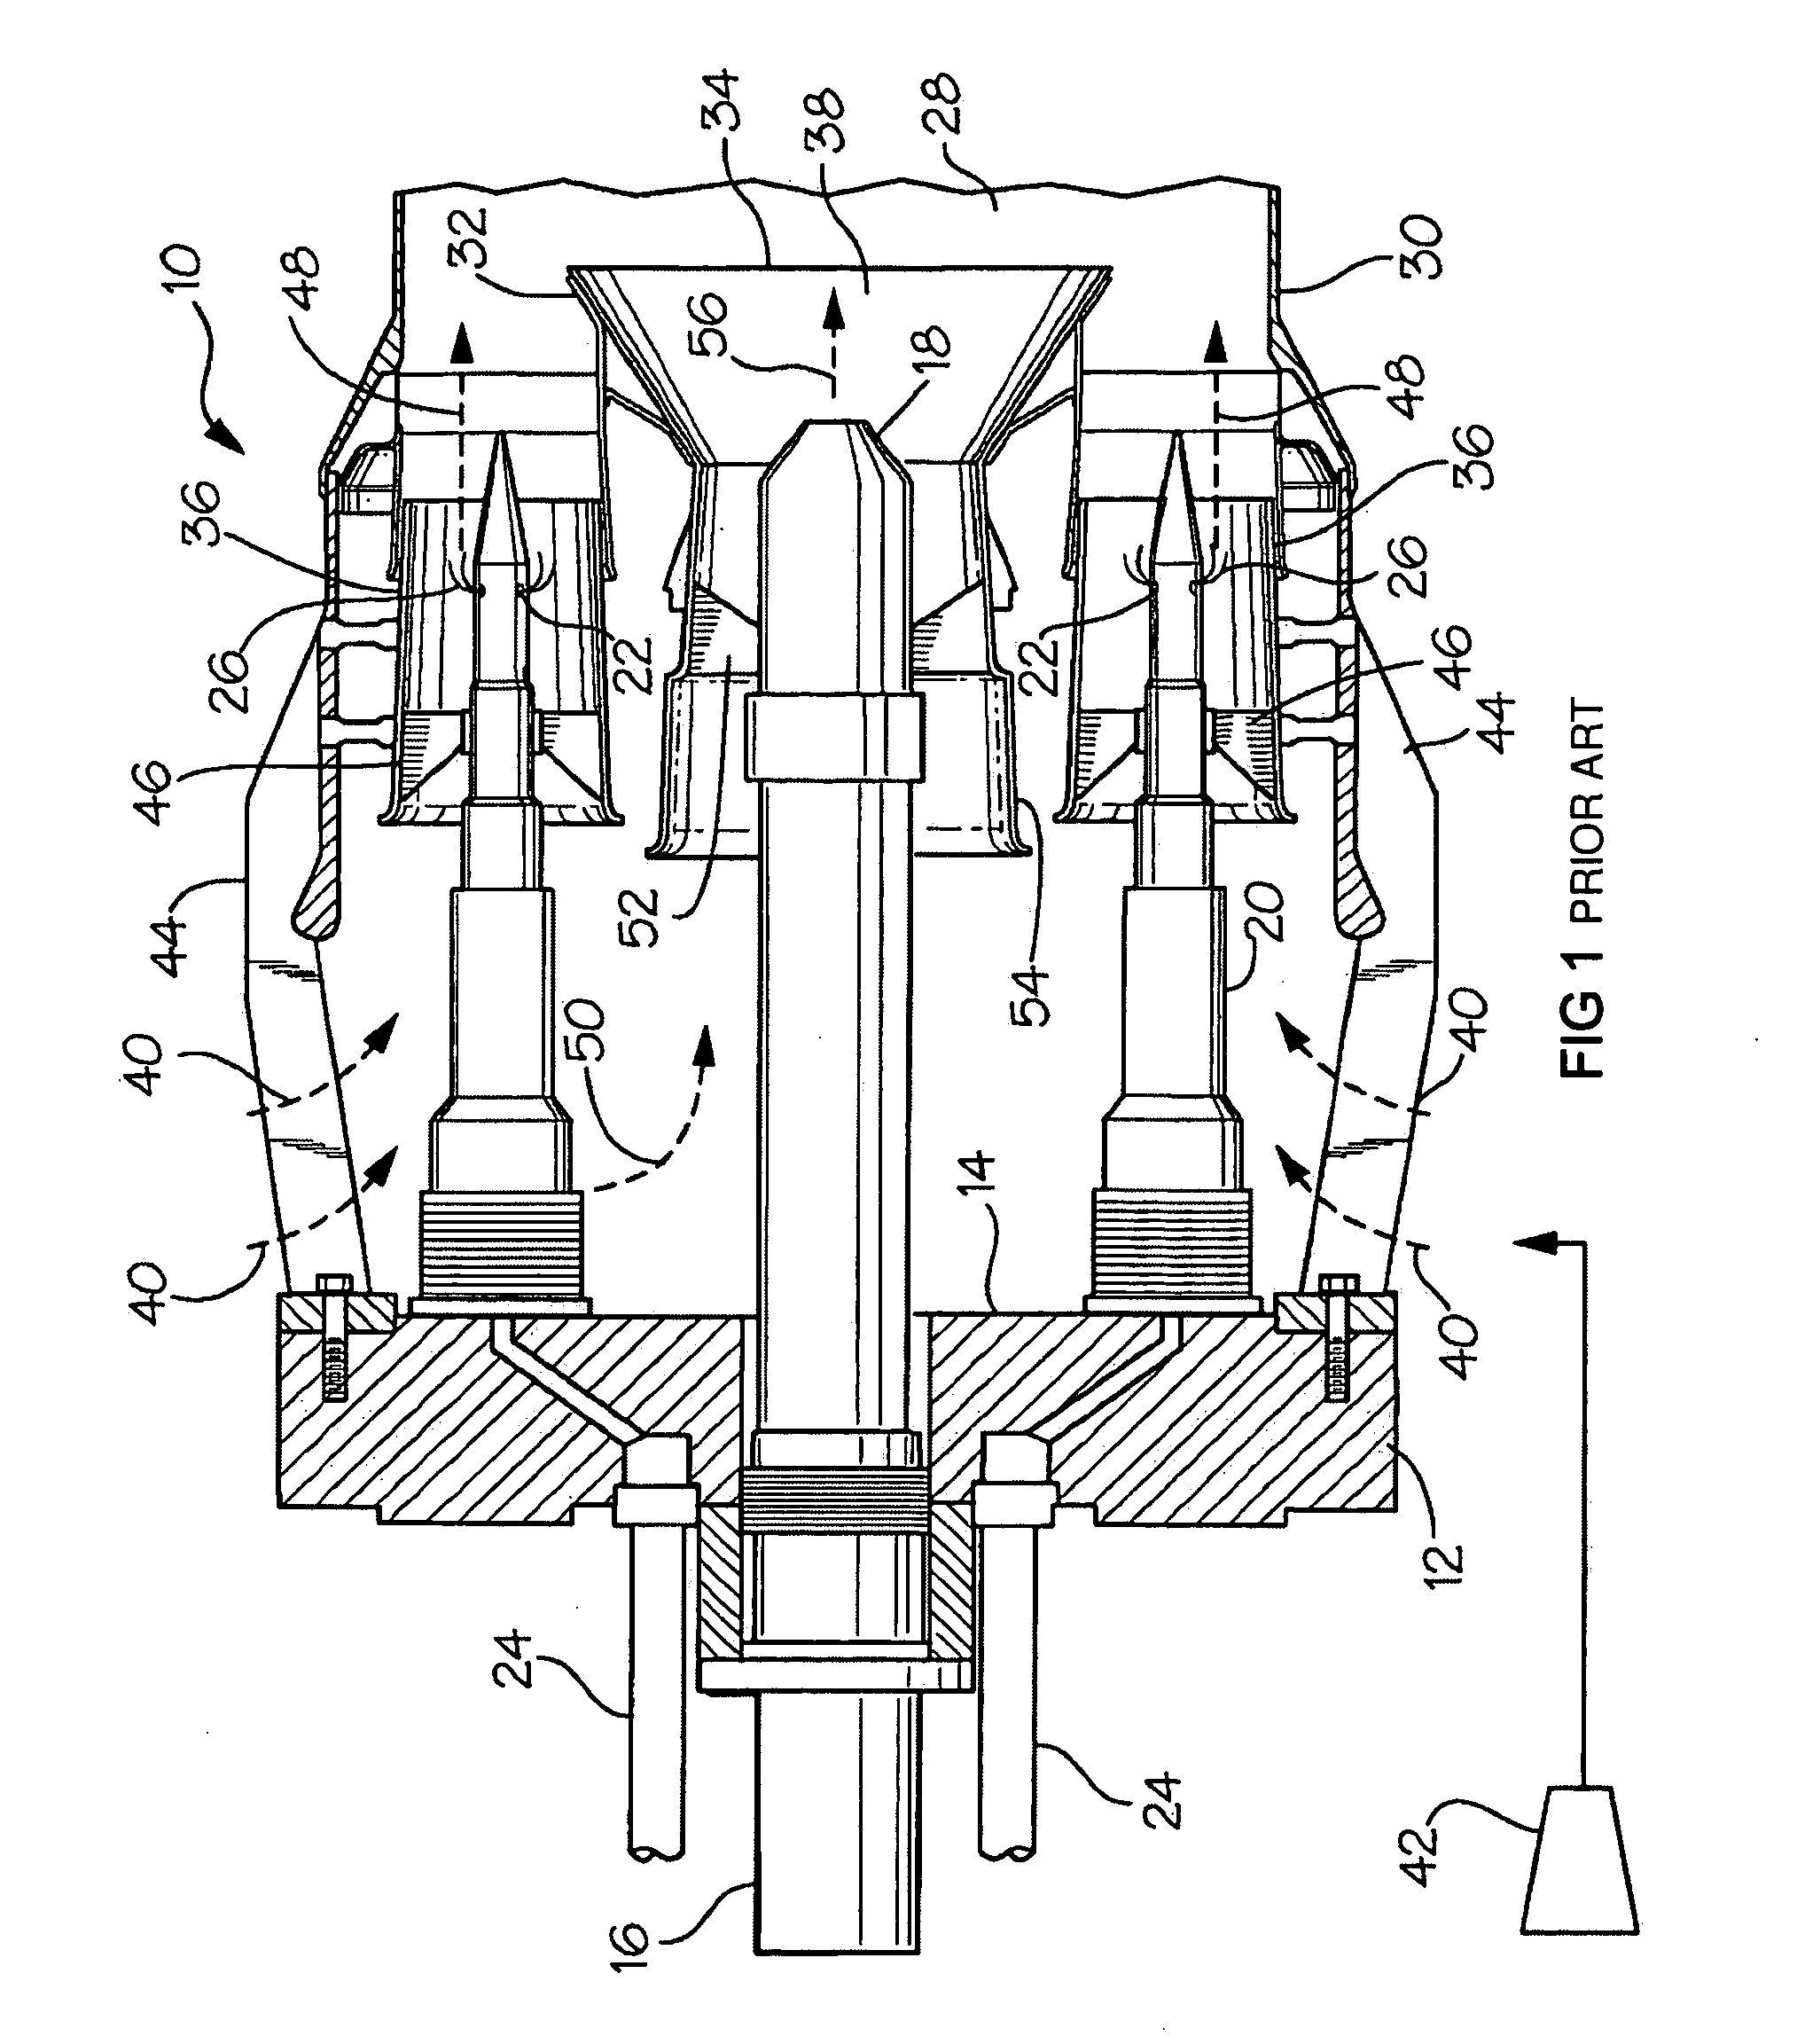 Flex-Fuel Injector for Gas Turbines